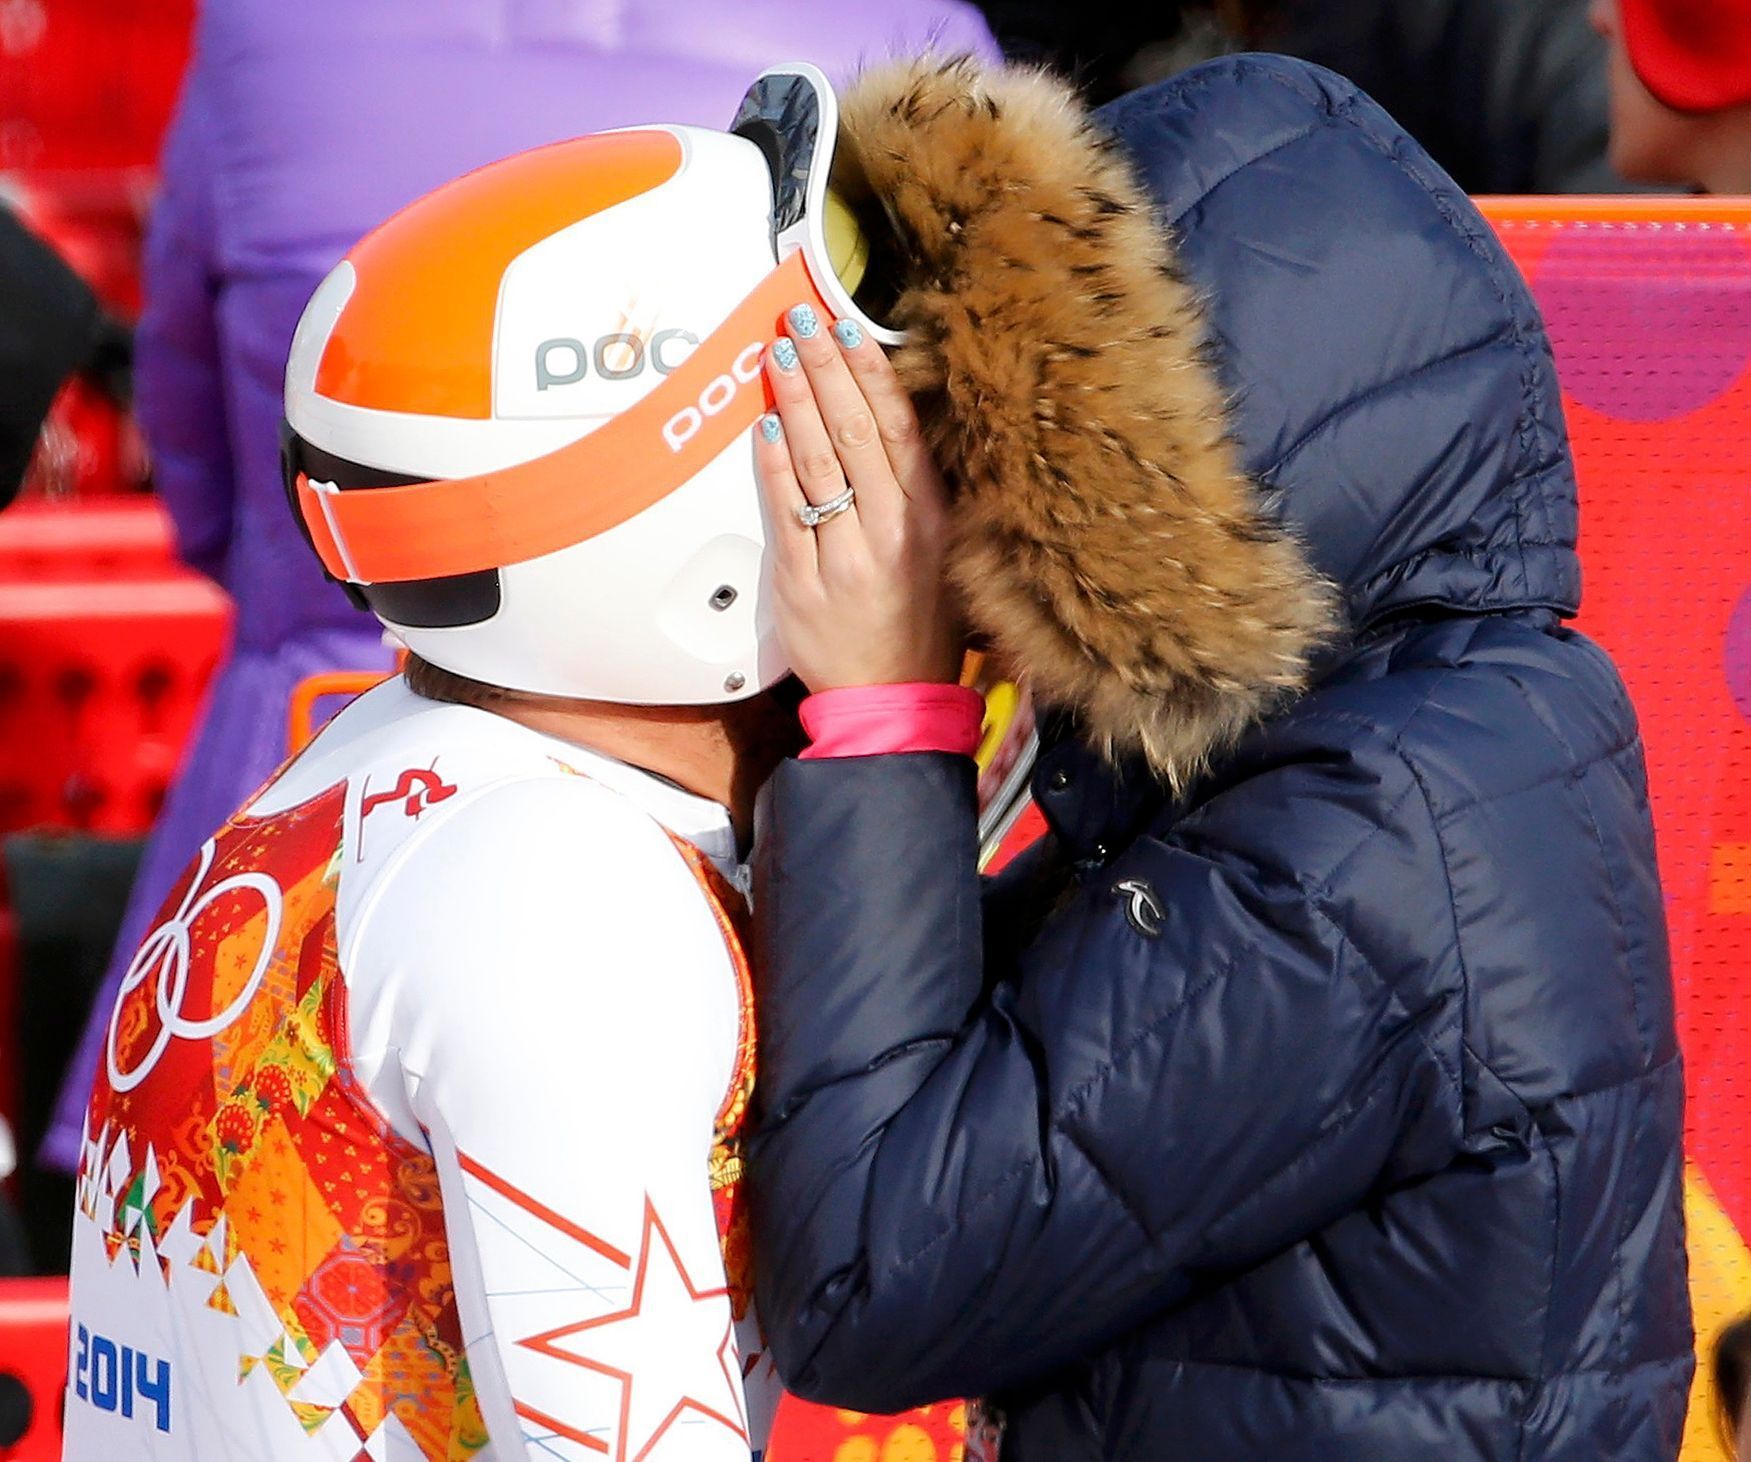 Bode Miller of the U.S. and his wife Morgan Beck kiss in the mixed zone after he finished in the men's alpine skiing Super-G competition during the 2014 Sochi Winter Olympics at the Rosa Khutor Alpine